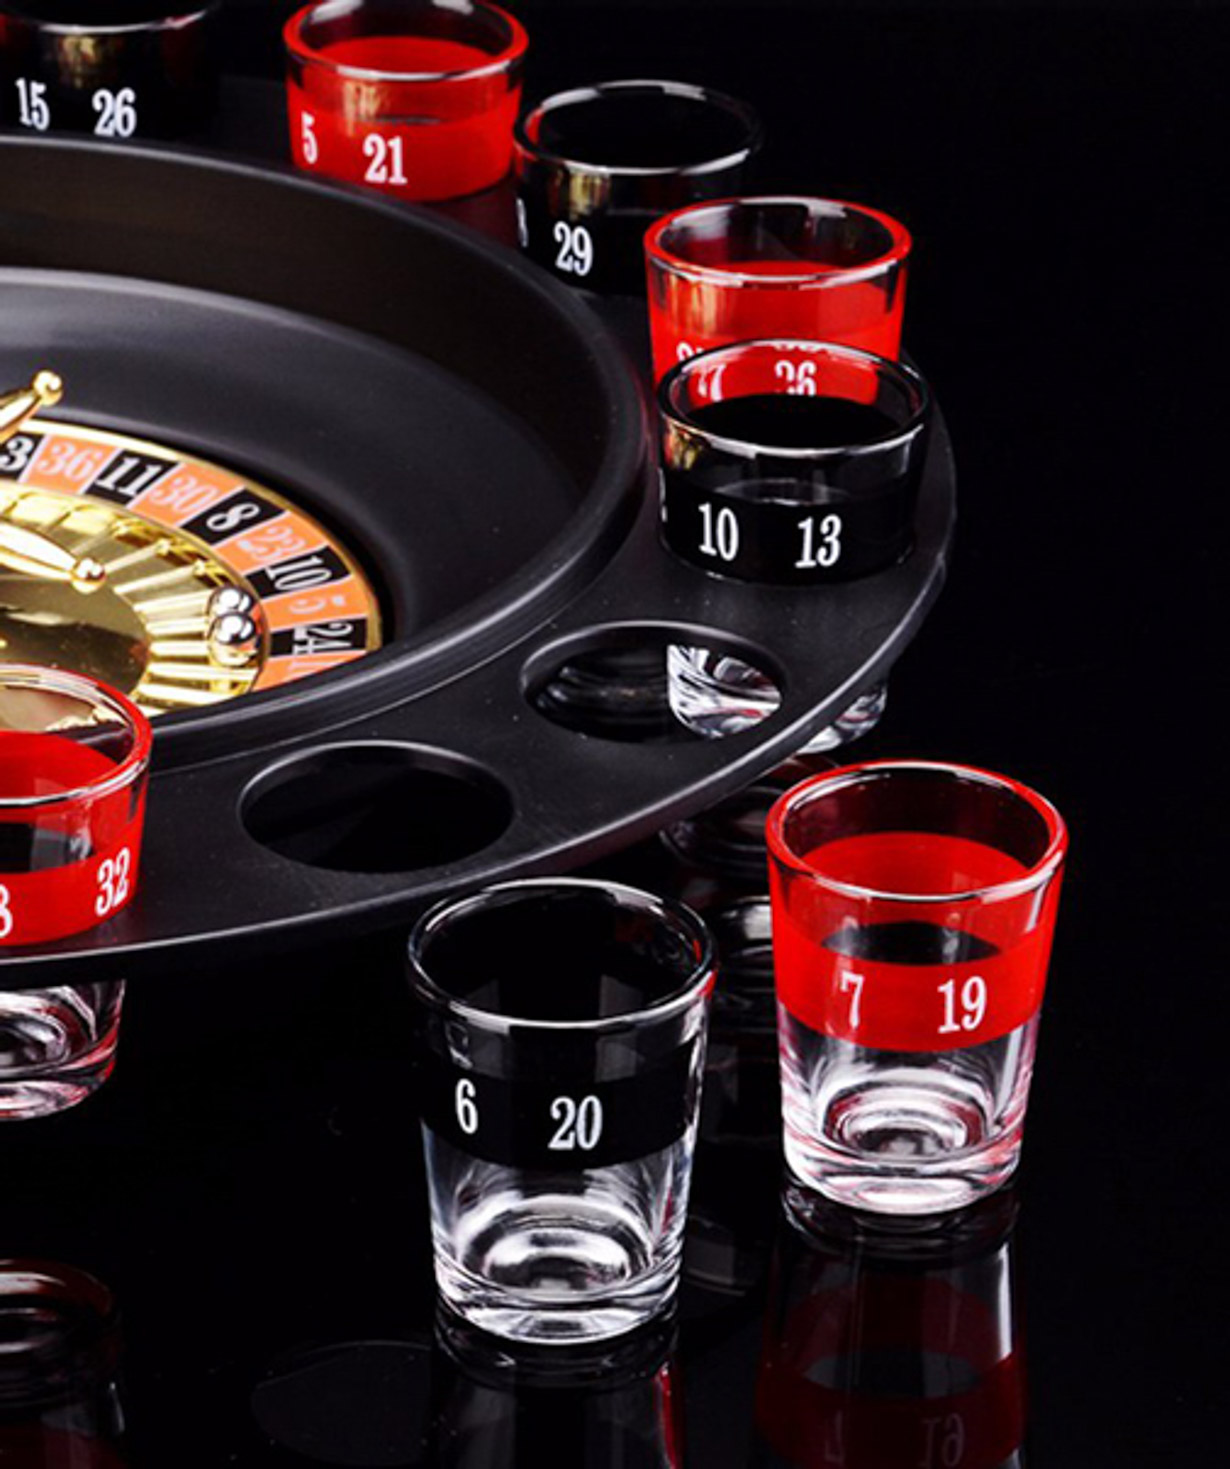 Roulette `Creative Gifts` drink if you can